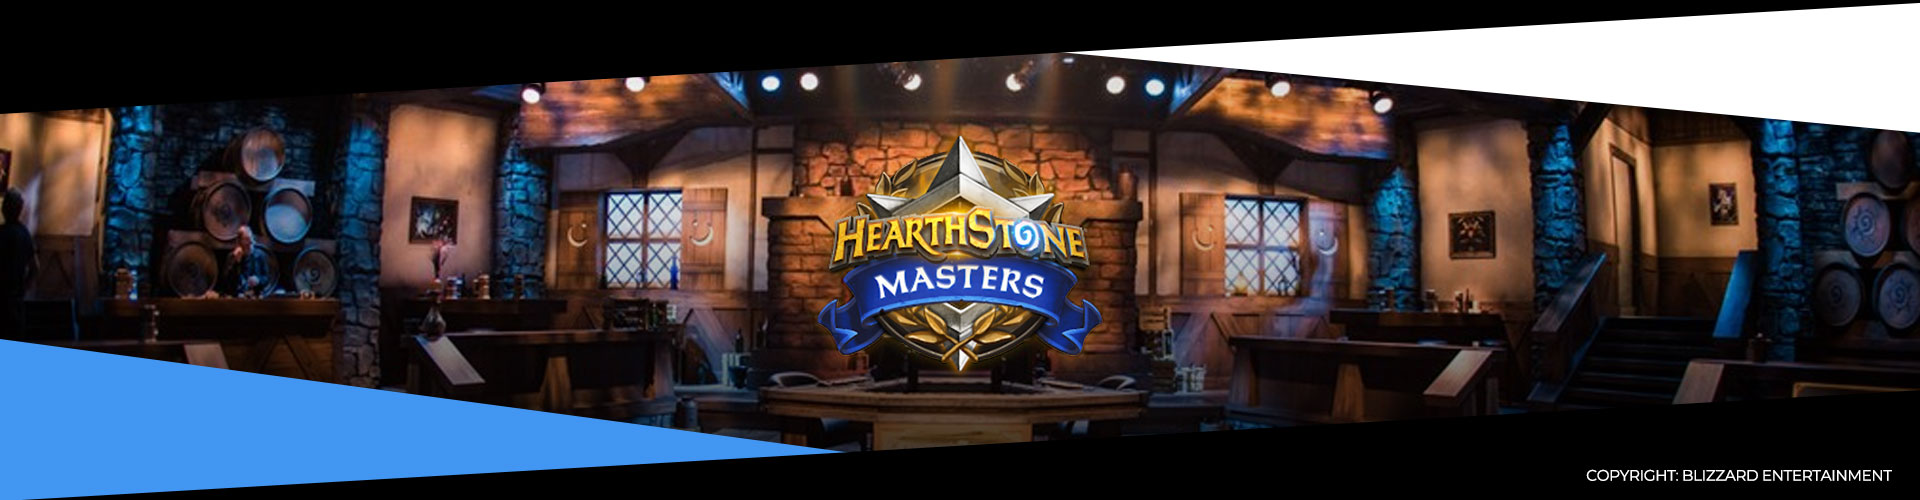 Hearthstone Masters Tour 2020 Los Angeles